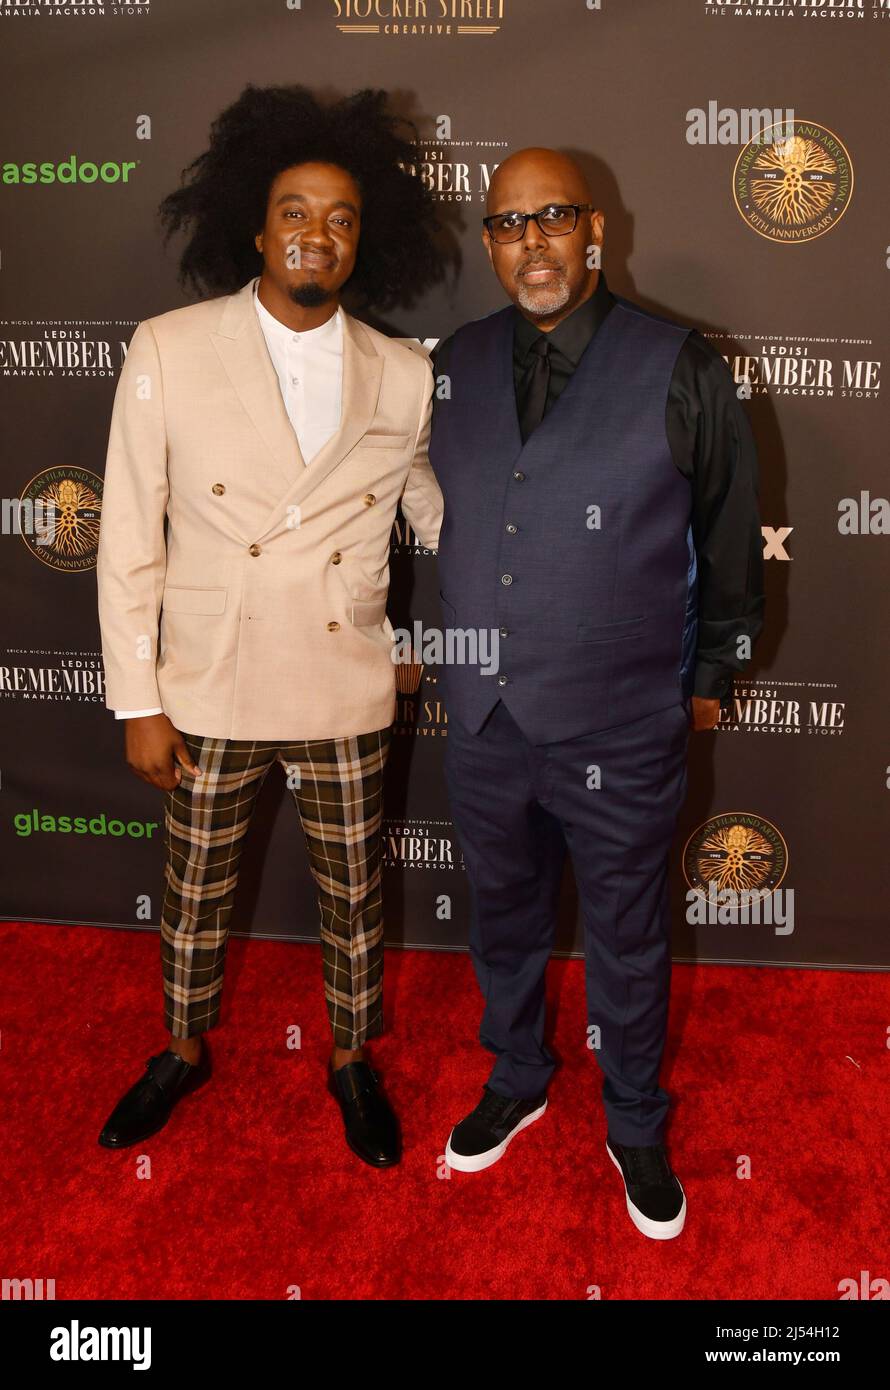 Los Angeles, Ca. 19th Apr, 2022. Paul Wright, Maestro Lightford attend the Opening Night of the Pan African Film & Arts Festival world premiere of Remember Me: The Mahalia Jackson Story at the Directors Guild Of America on April 19, 2022 in Los Angeles, California. Credit: Koi Sojer/Snap'n U Photos/Media Punch/Alamy Live News Stock Photo